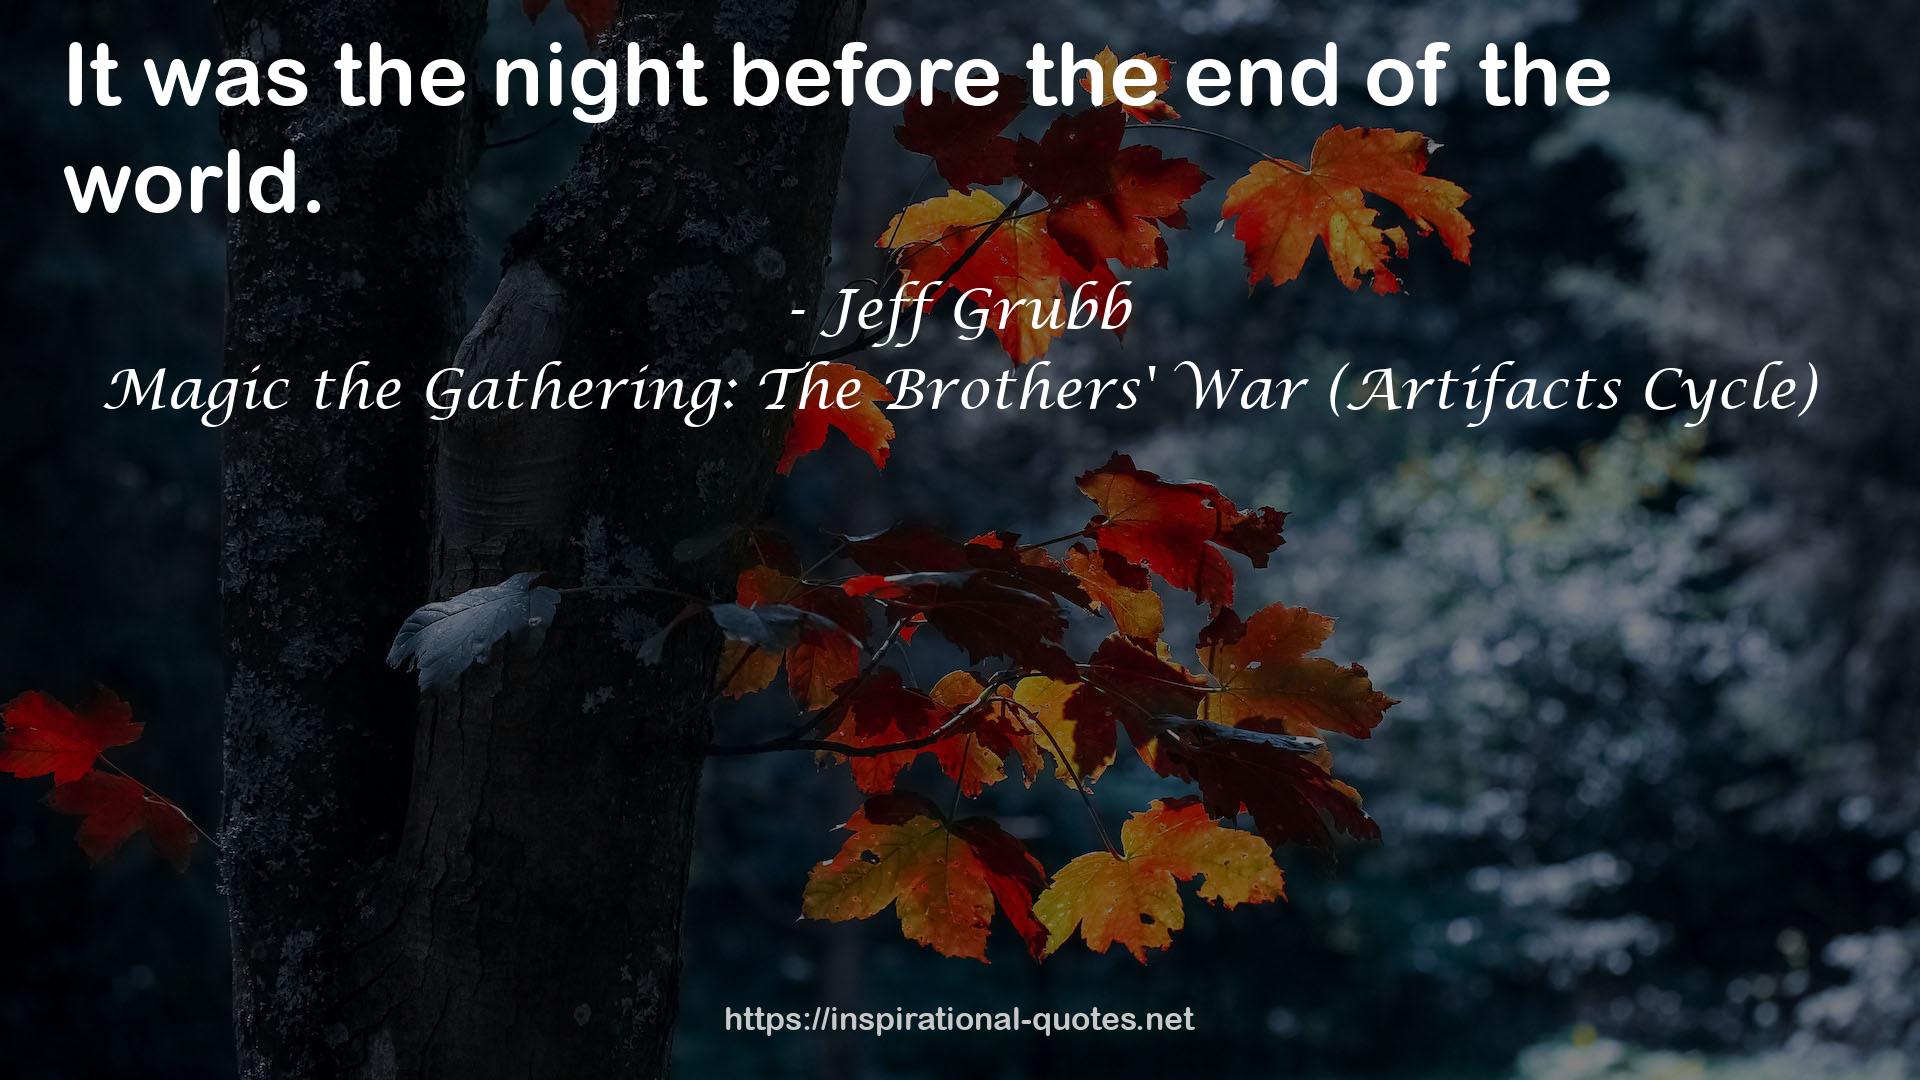 Magic the Gathering: The Brothers' War (Artifacts Cycle) QUOTES